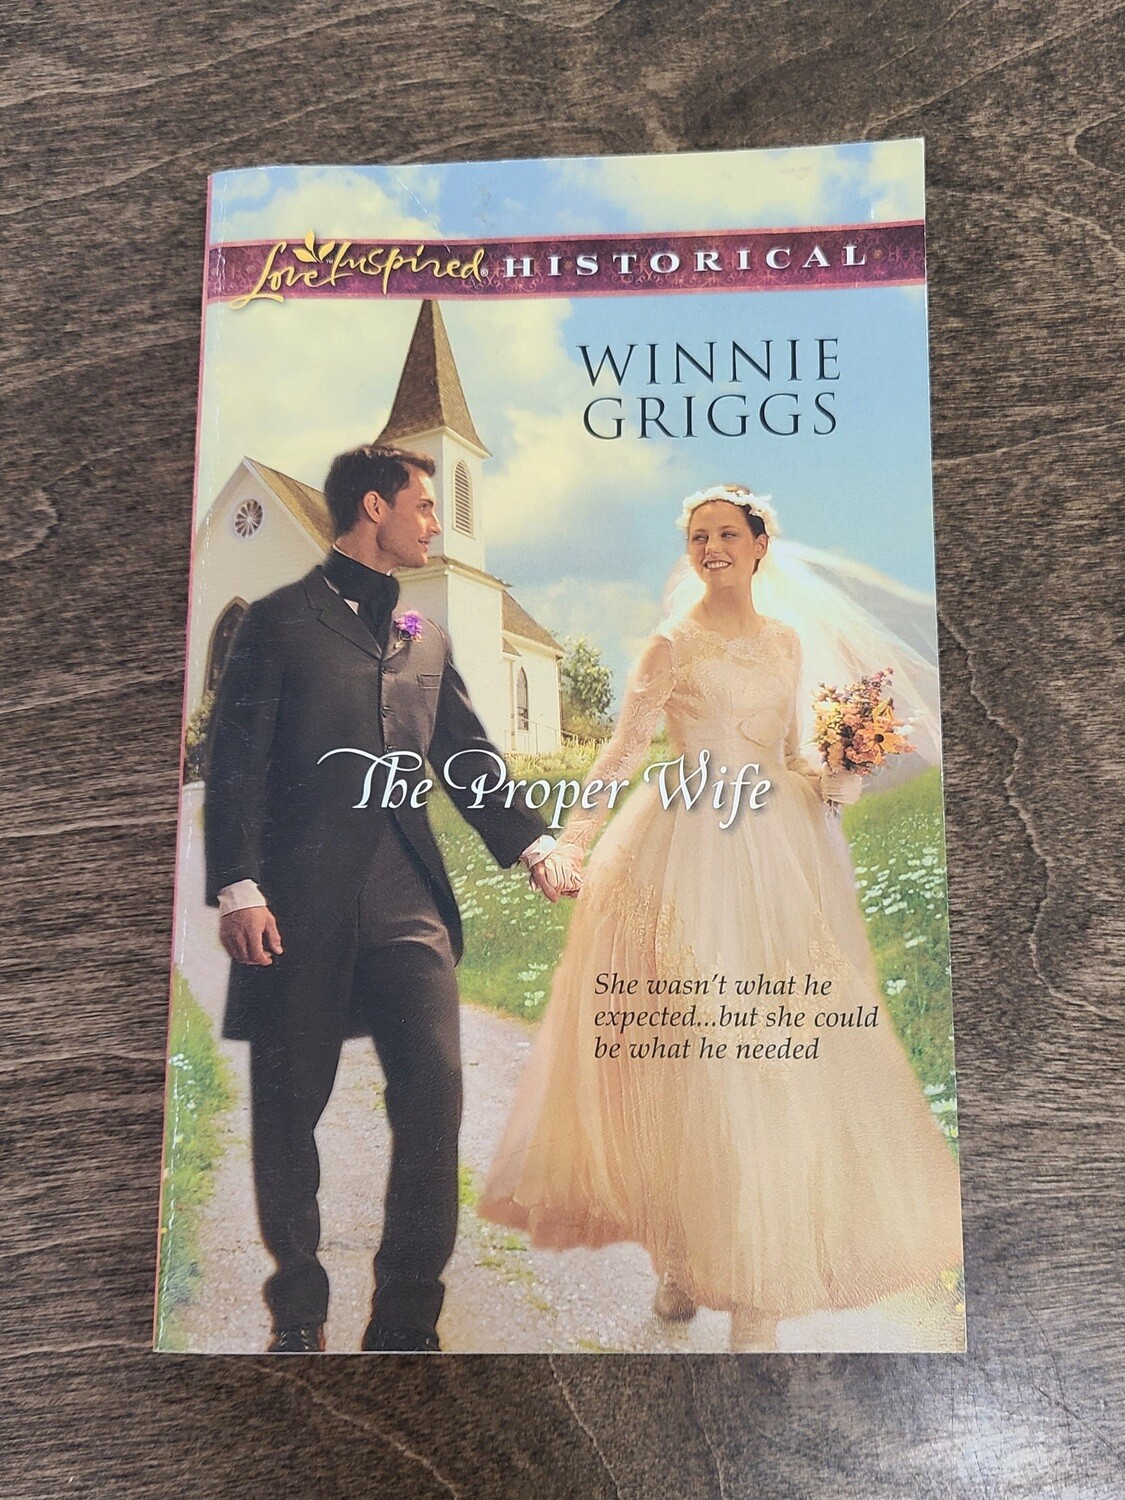 The Proper Wife by Winnie Griggs